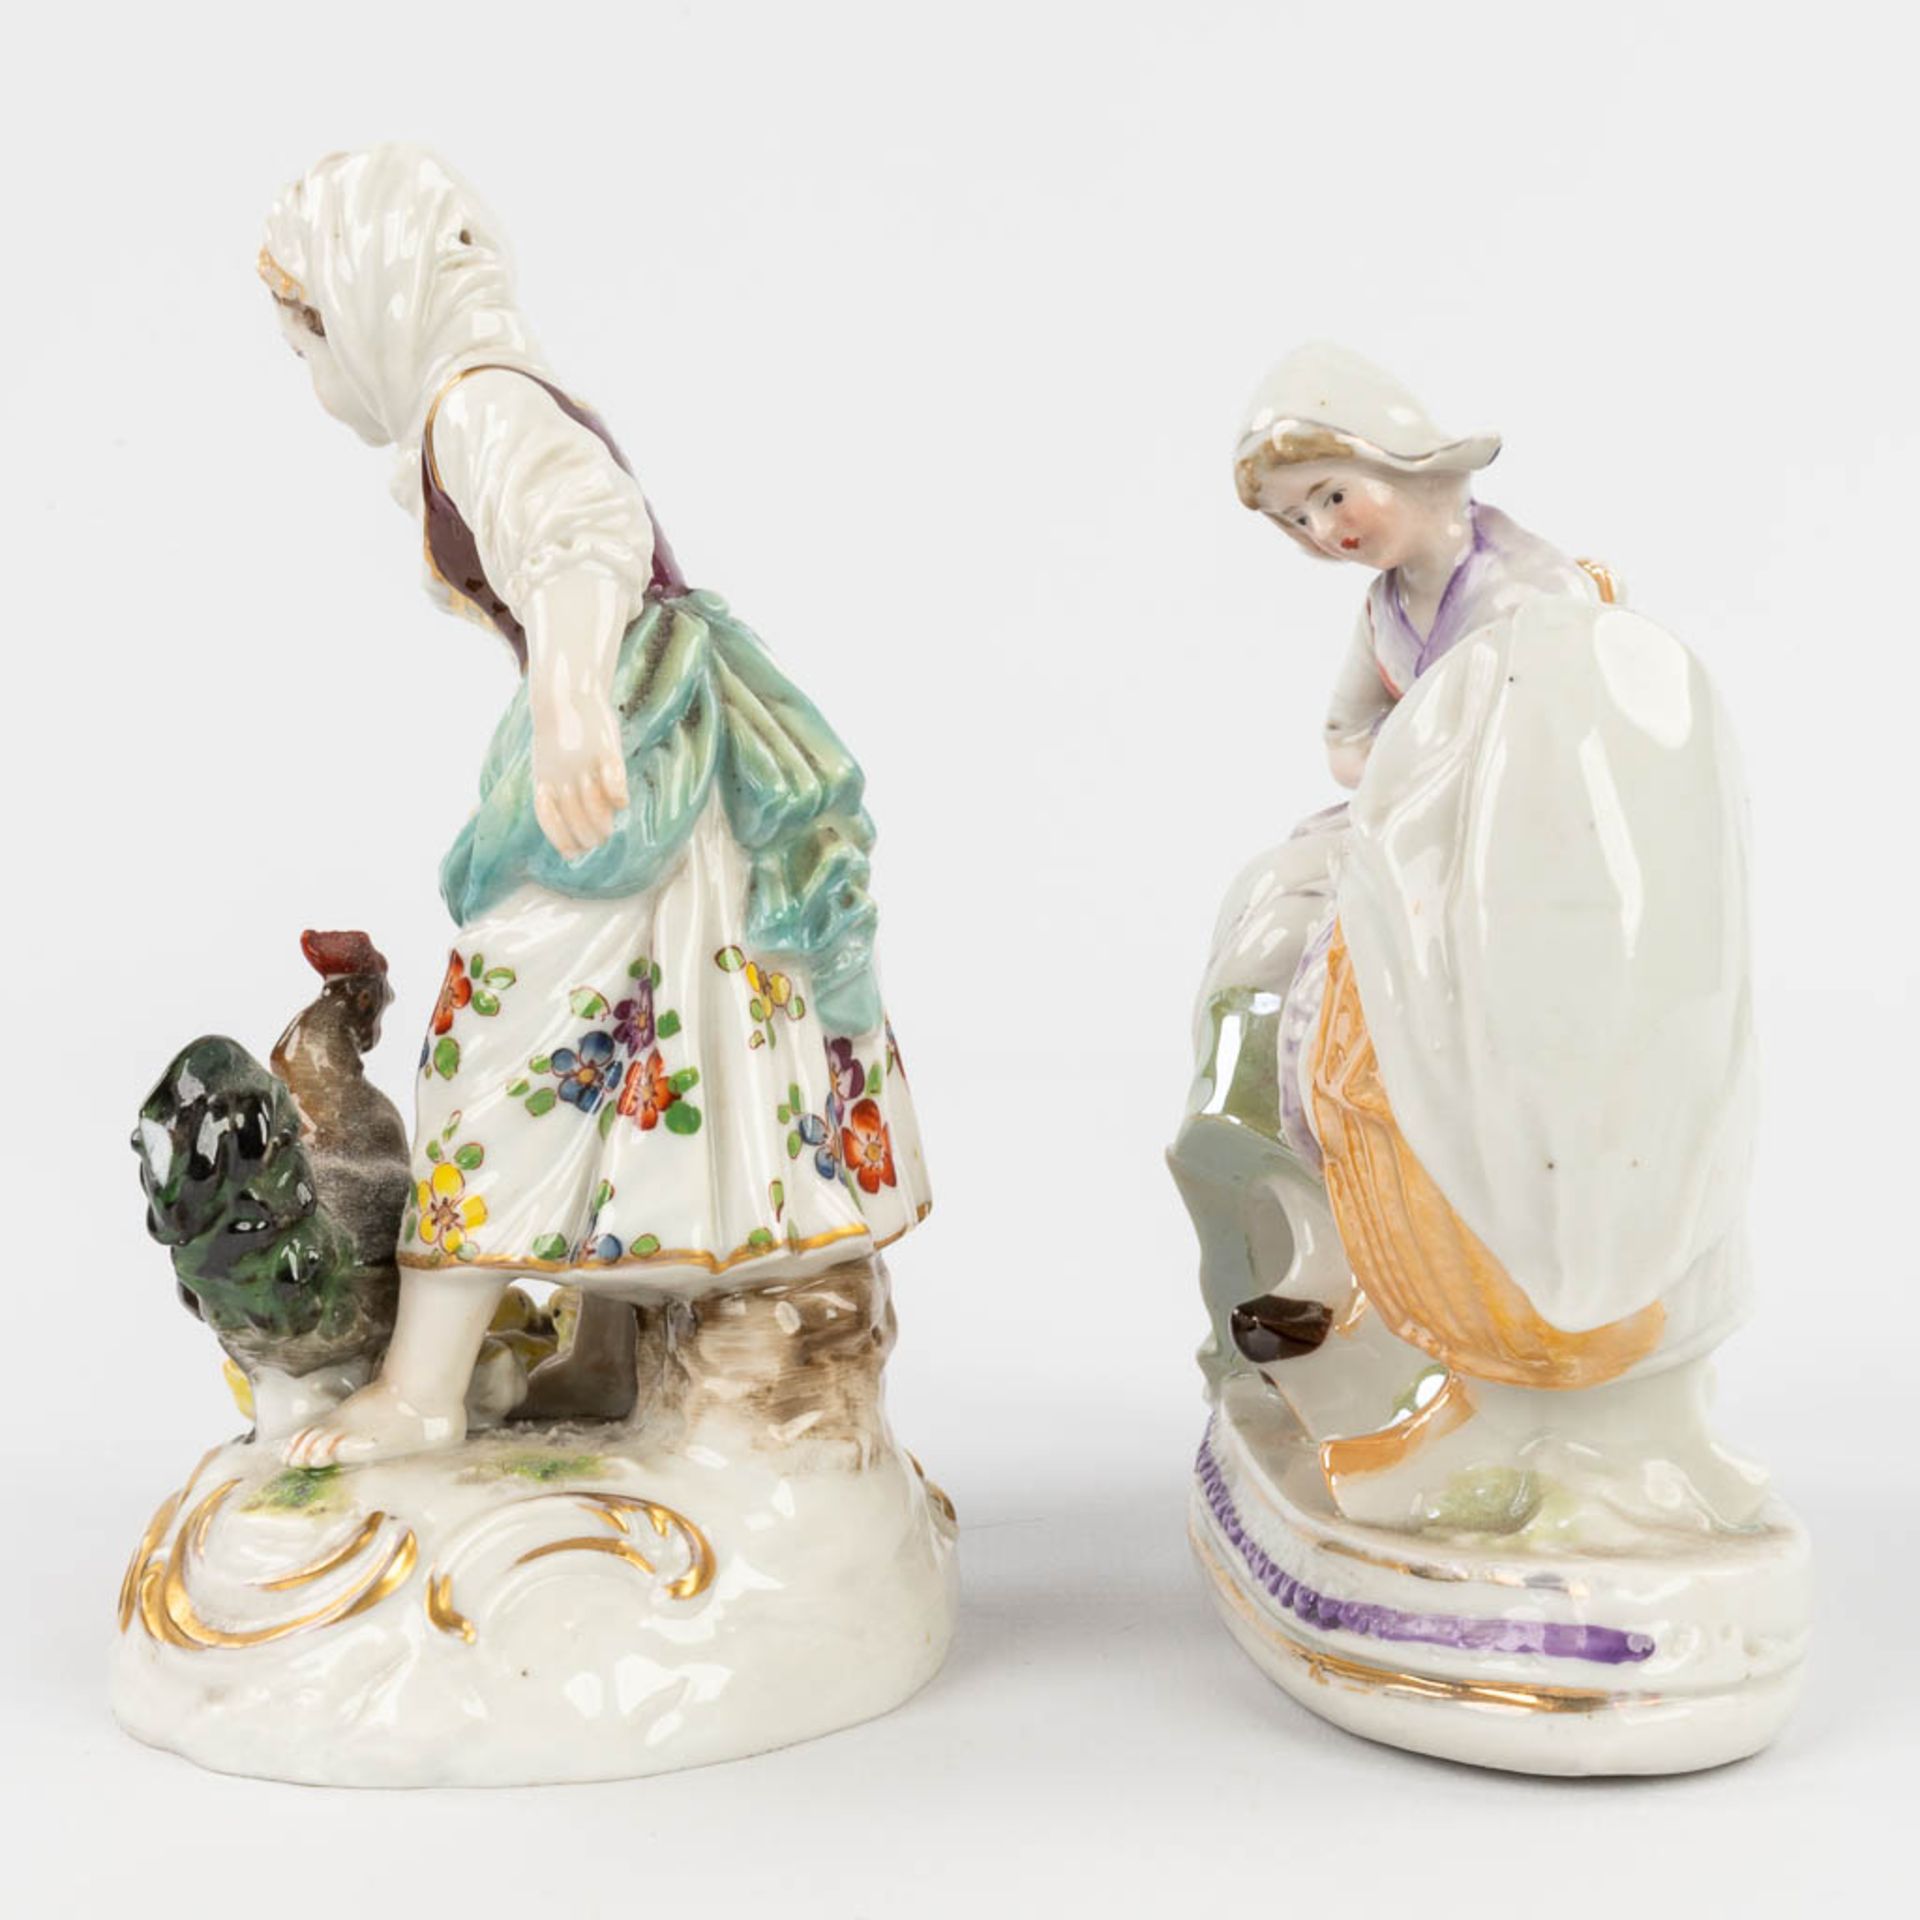 Volkstedt, a collection of 2 figurines made of porcelain in Germany. (H:13 cm) - Image 13 of 14